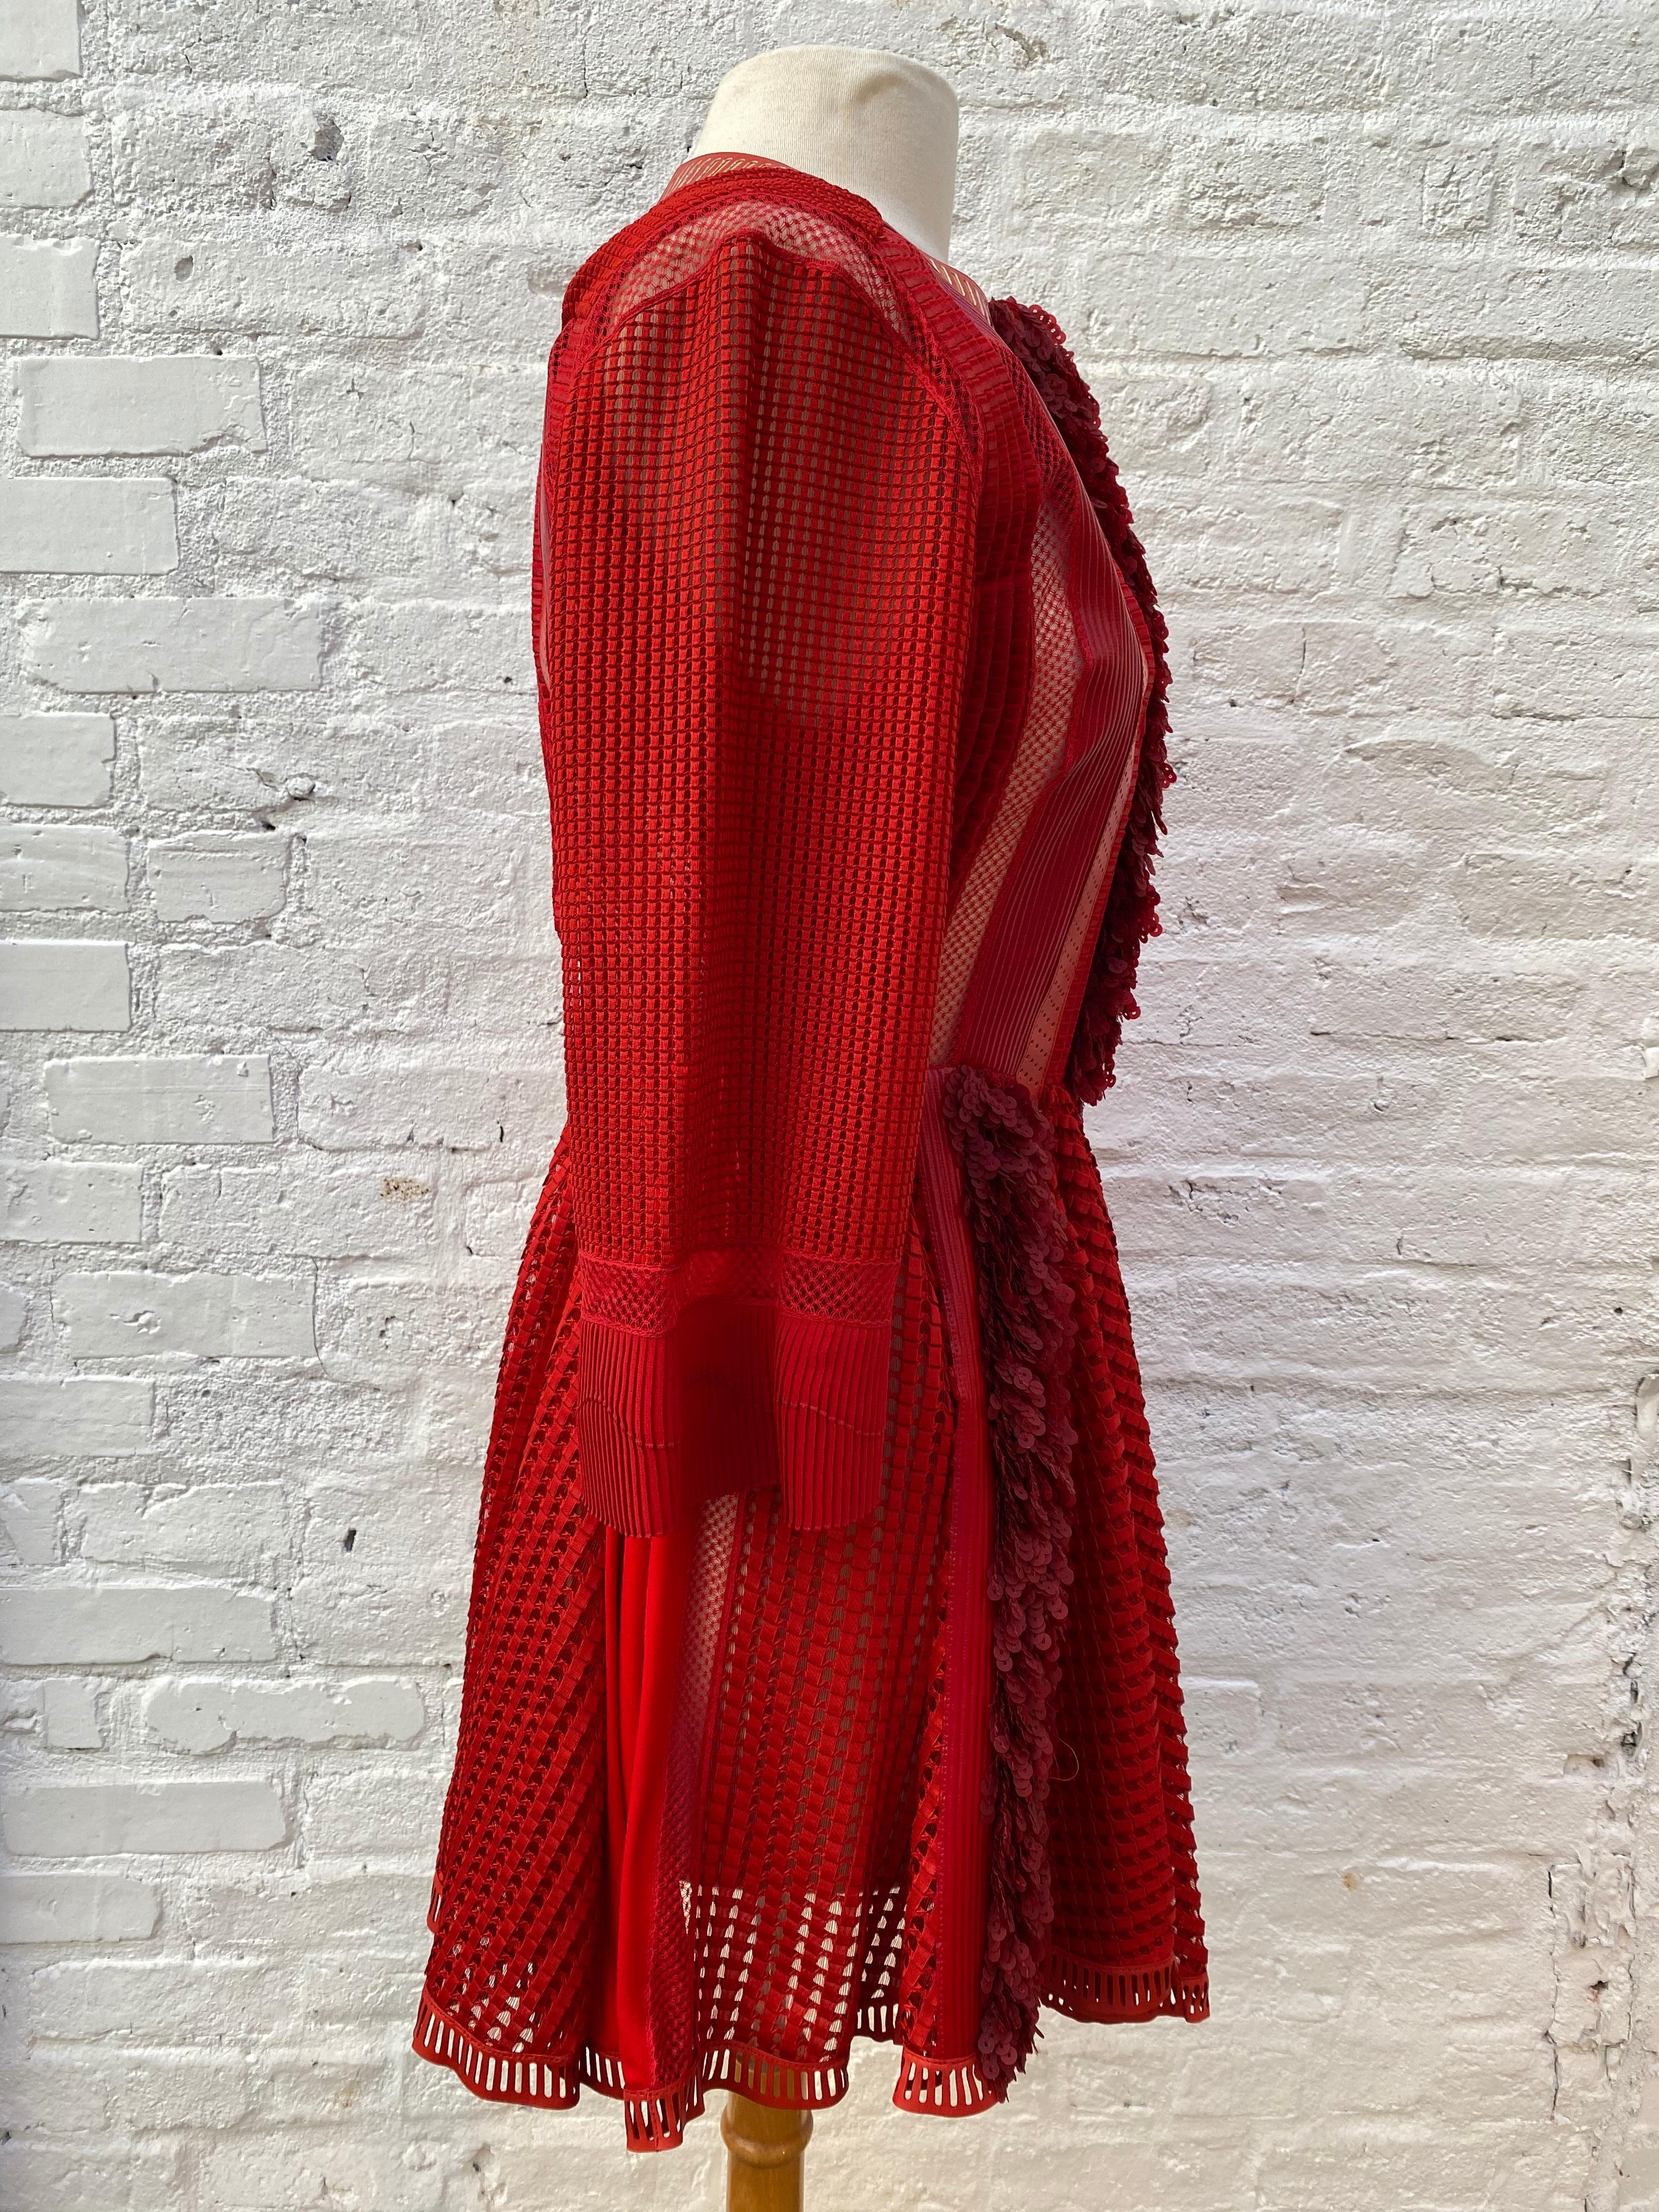 Louis Vuitton Red Dress. Like new condition. Original tags on dress. Never used. Guaranteed authentic. 

Measurements
Shoulder to Shoulder: 17